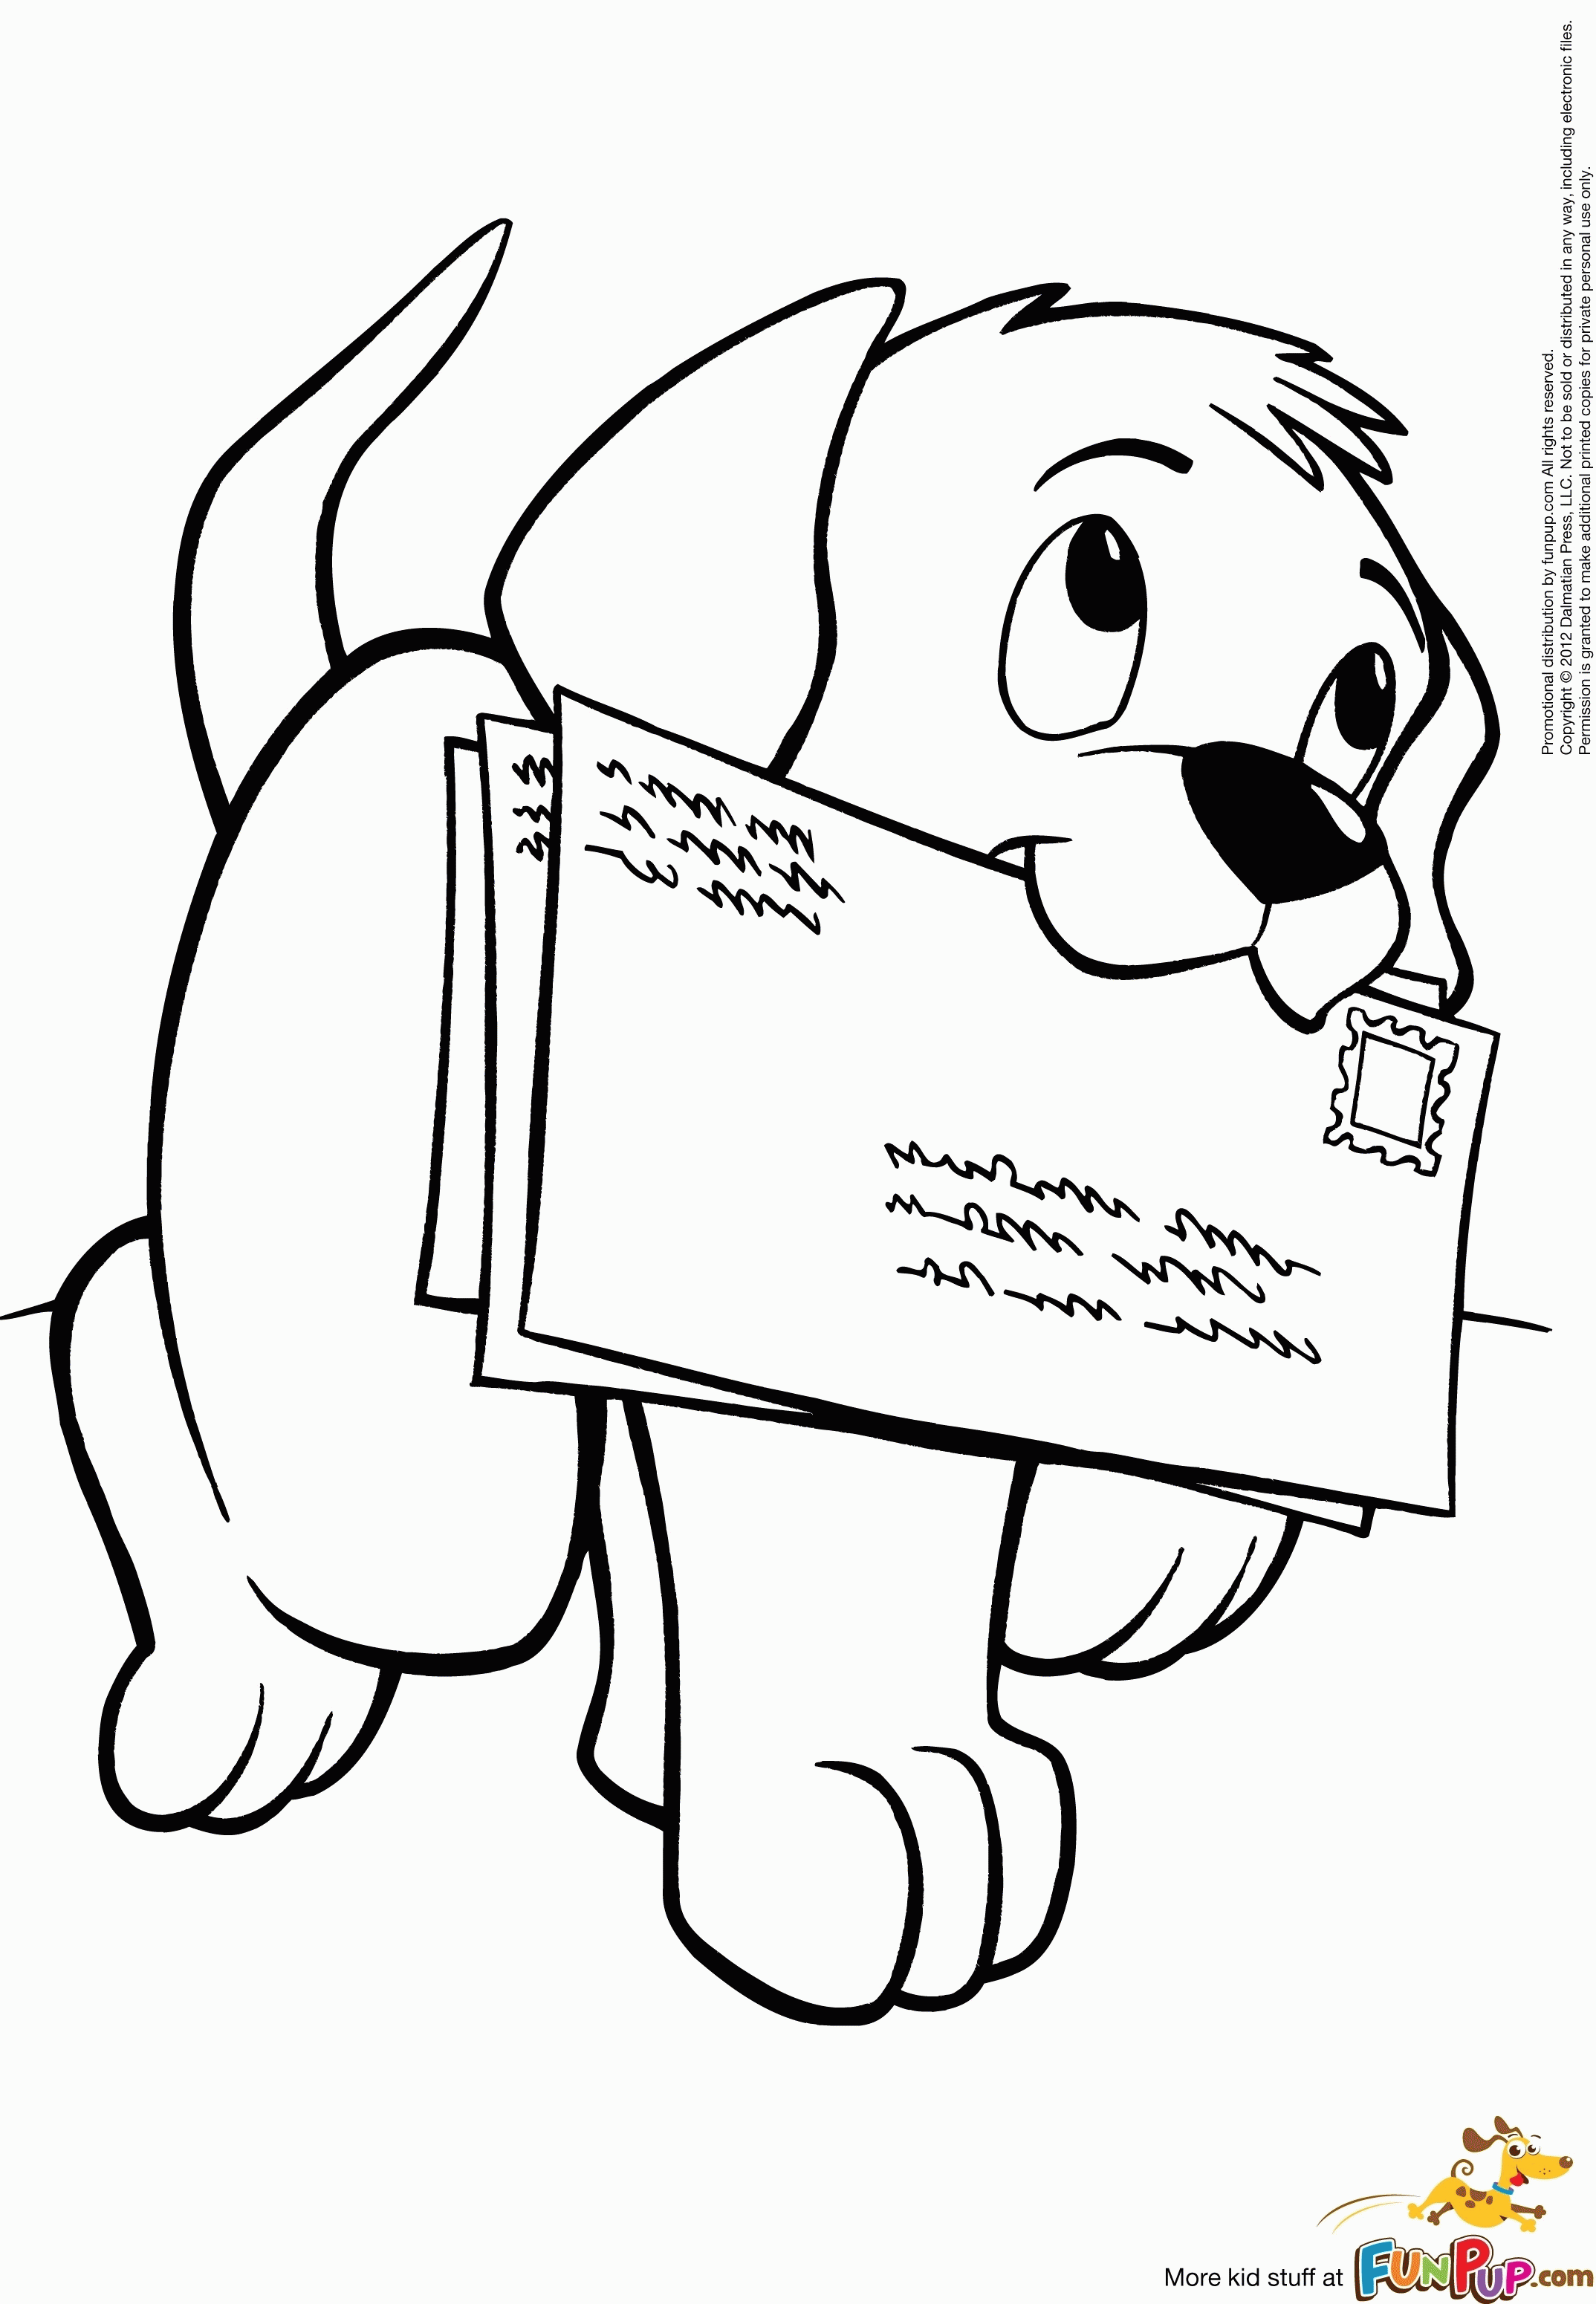 14 Free Pictures for: Coloring Pages Of Puppies. Temoon.us